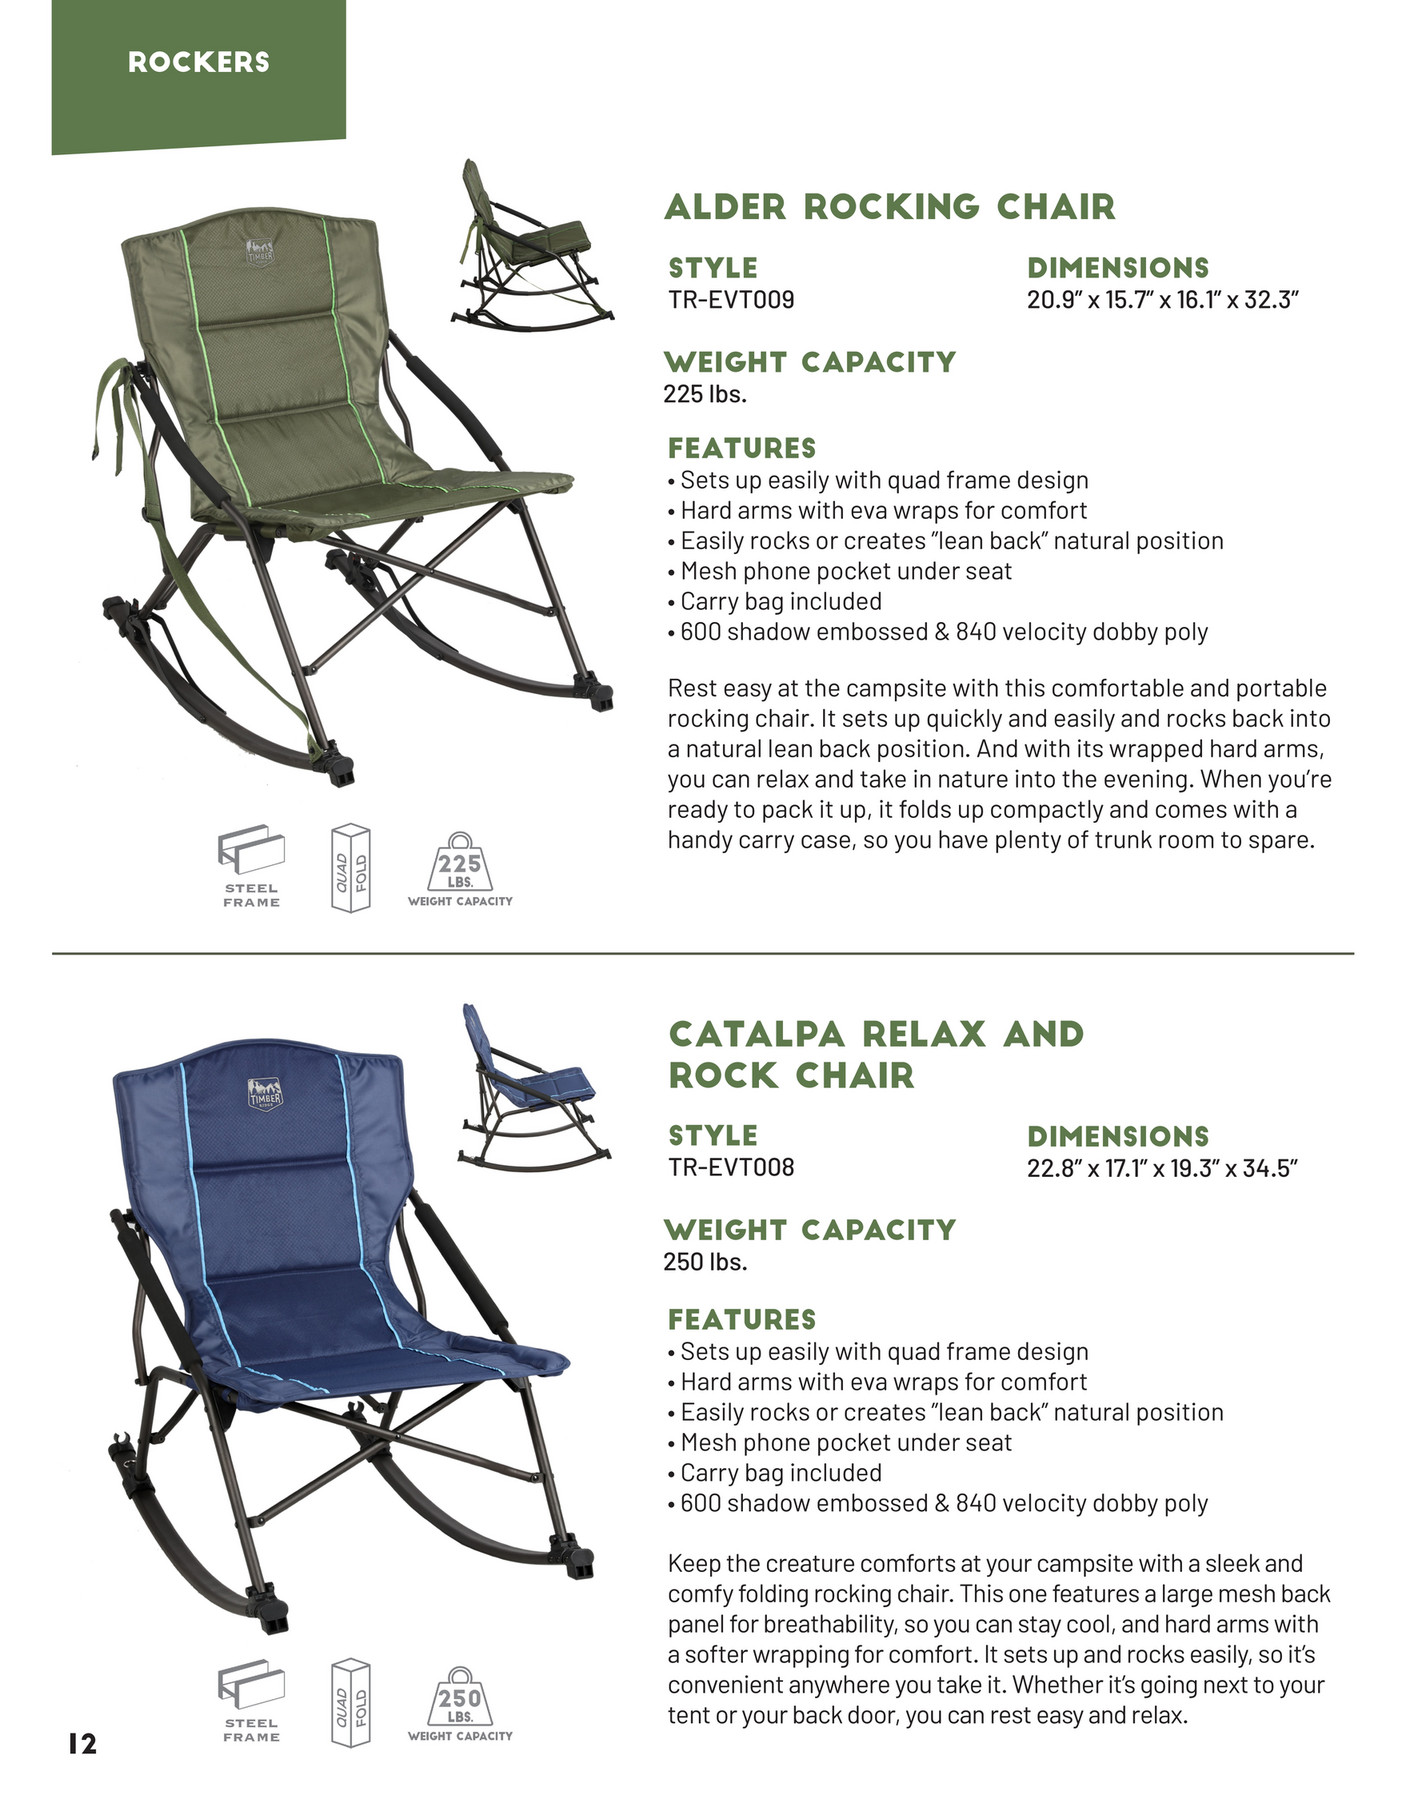 Westfield Outdoors 2019 Timber Ridge Catalog Page 12 13